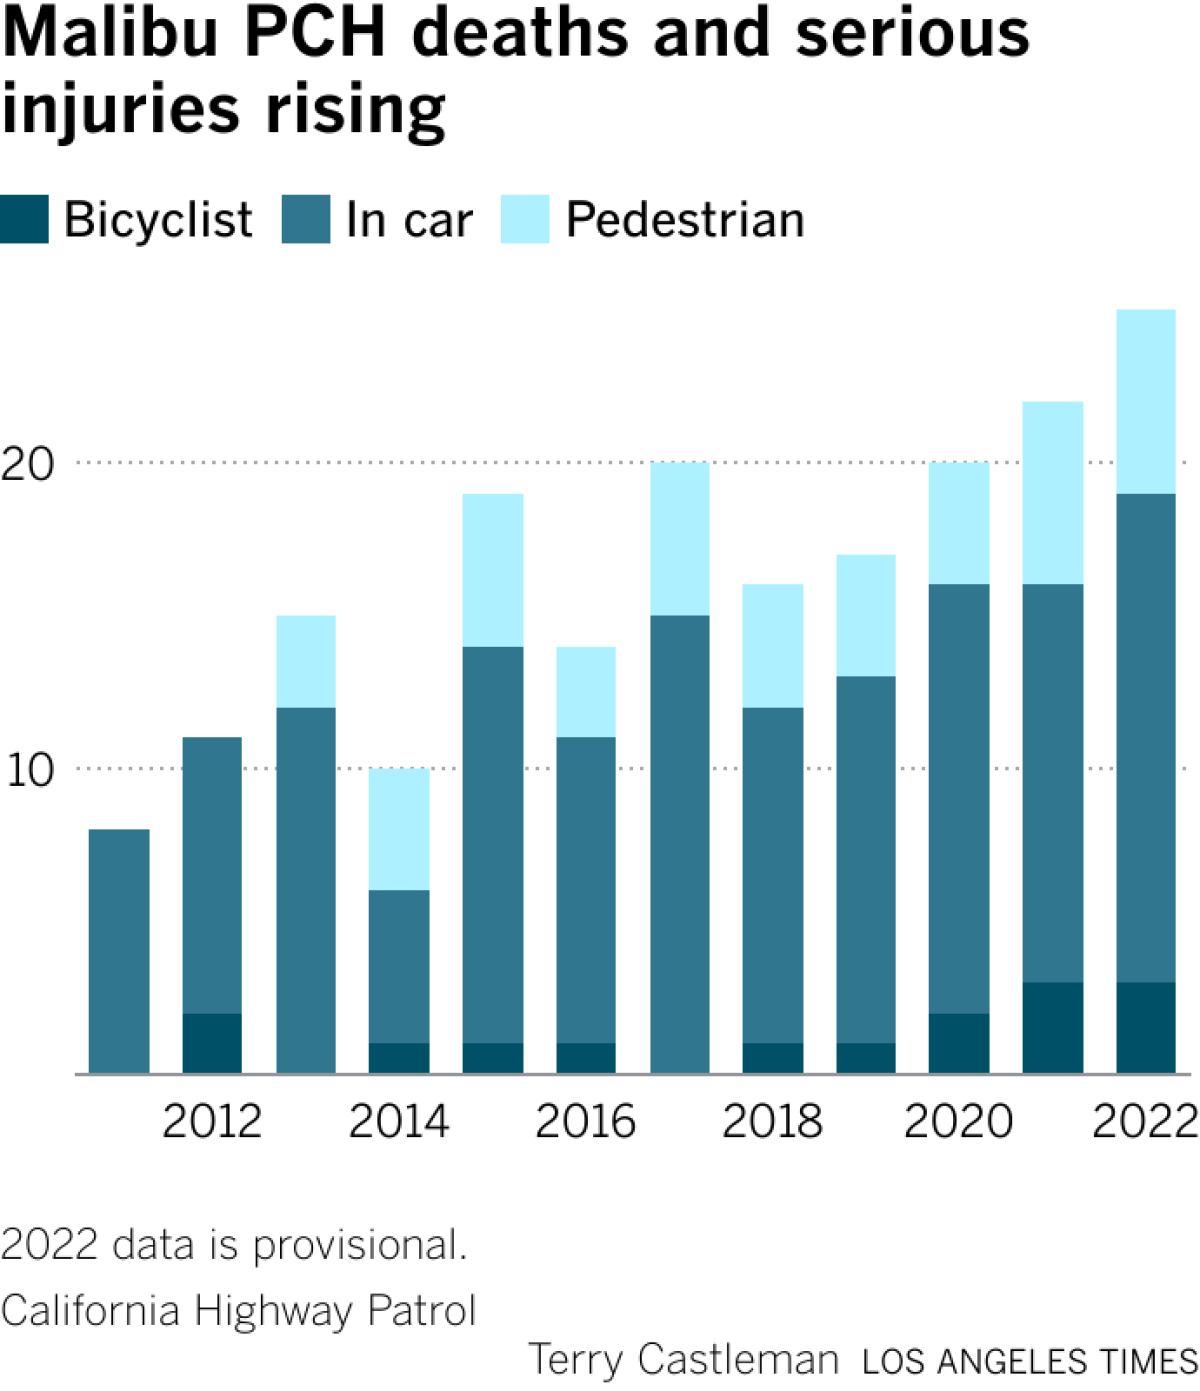 Bar chart showing increasing numbers of serious injuries and deaths on Malibu's Pacific Coast Highway